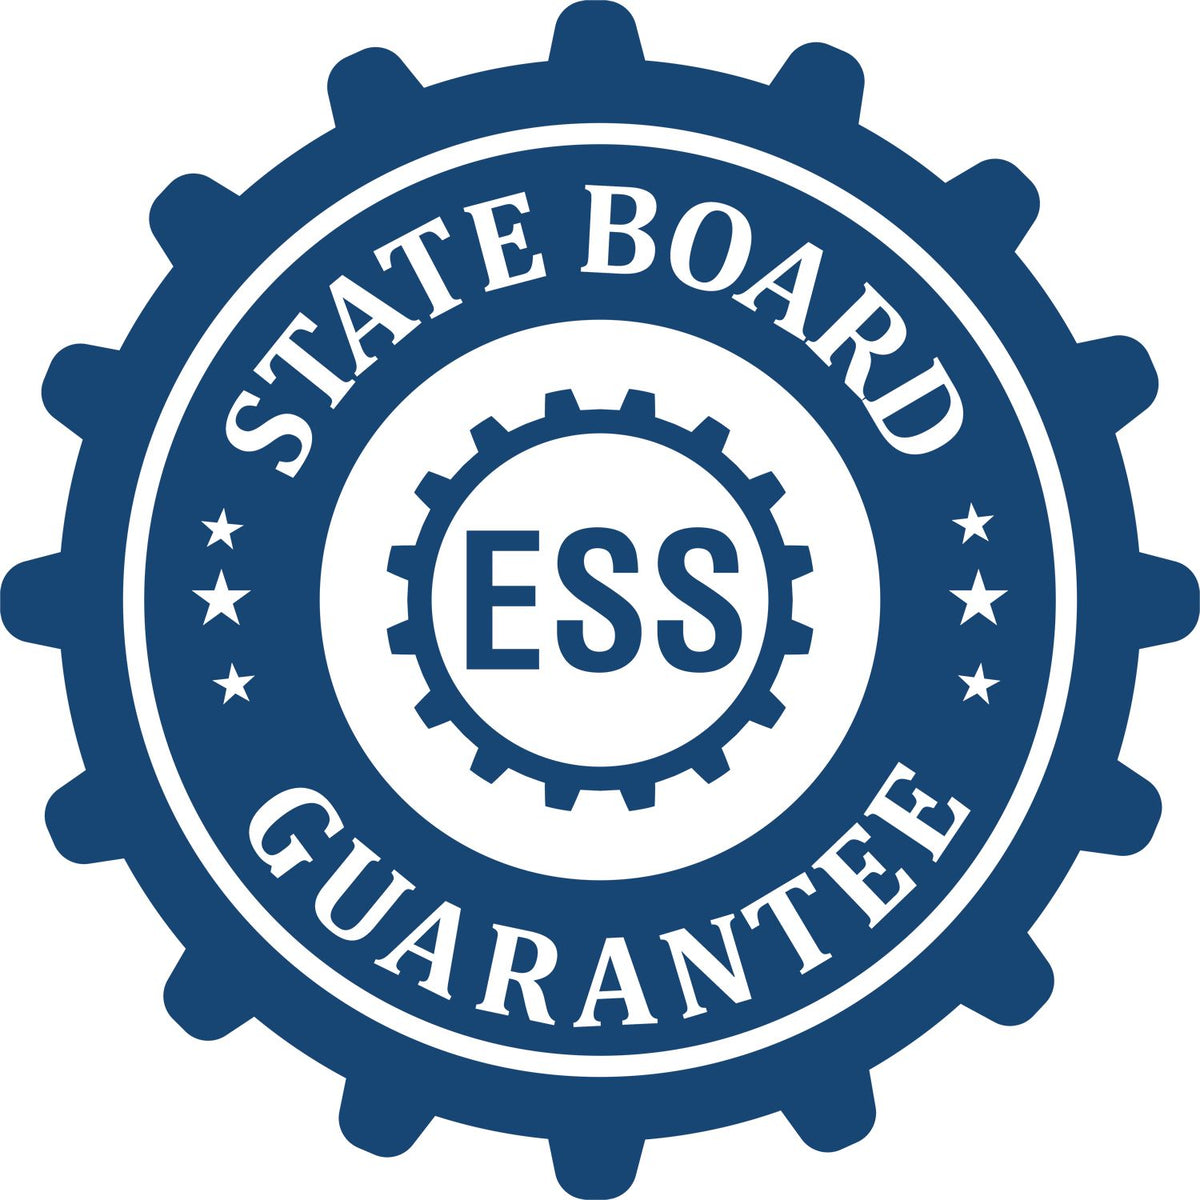 An emblem in a gear shape illustrating a state board guarantee for the Heavy-Duty Wisconsin Rectangular Notary Stamp product.